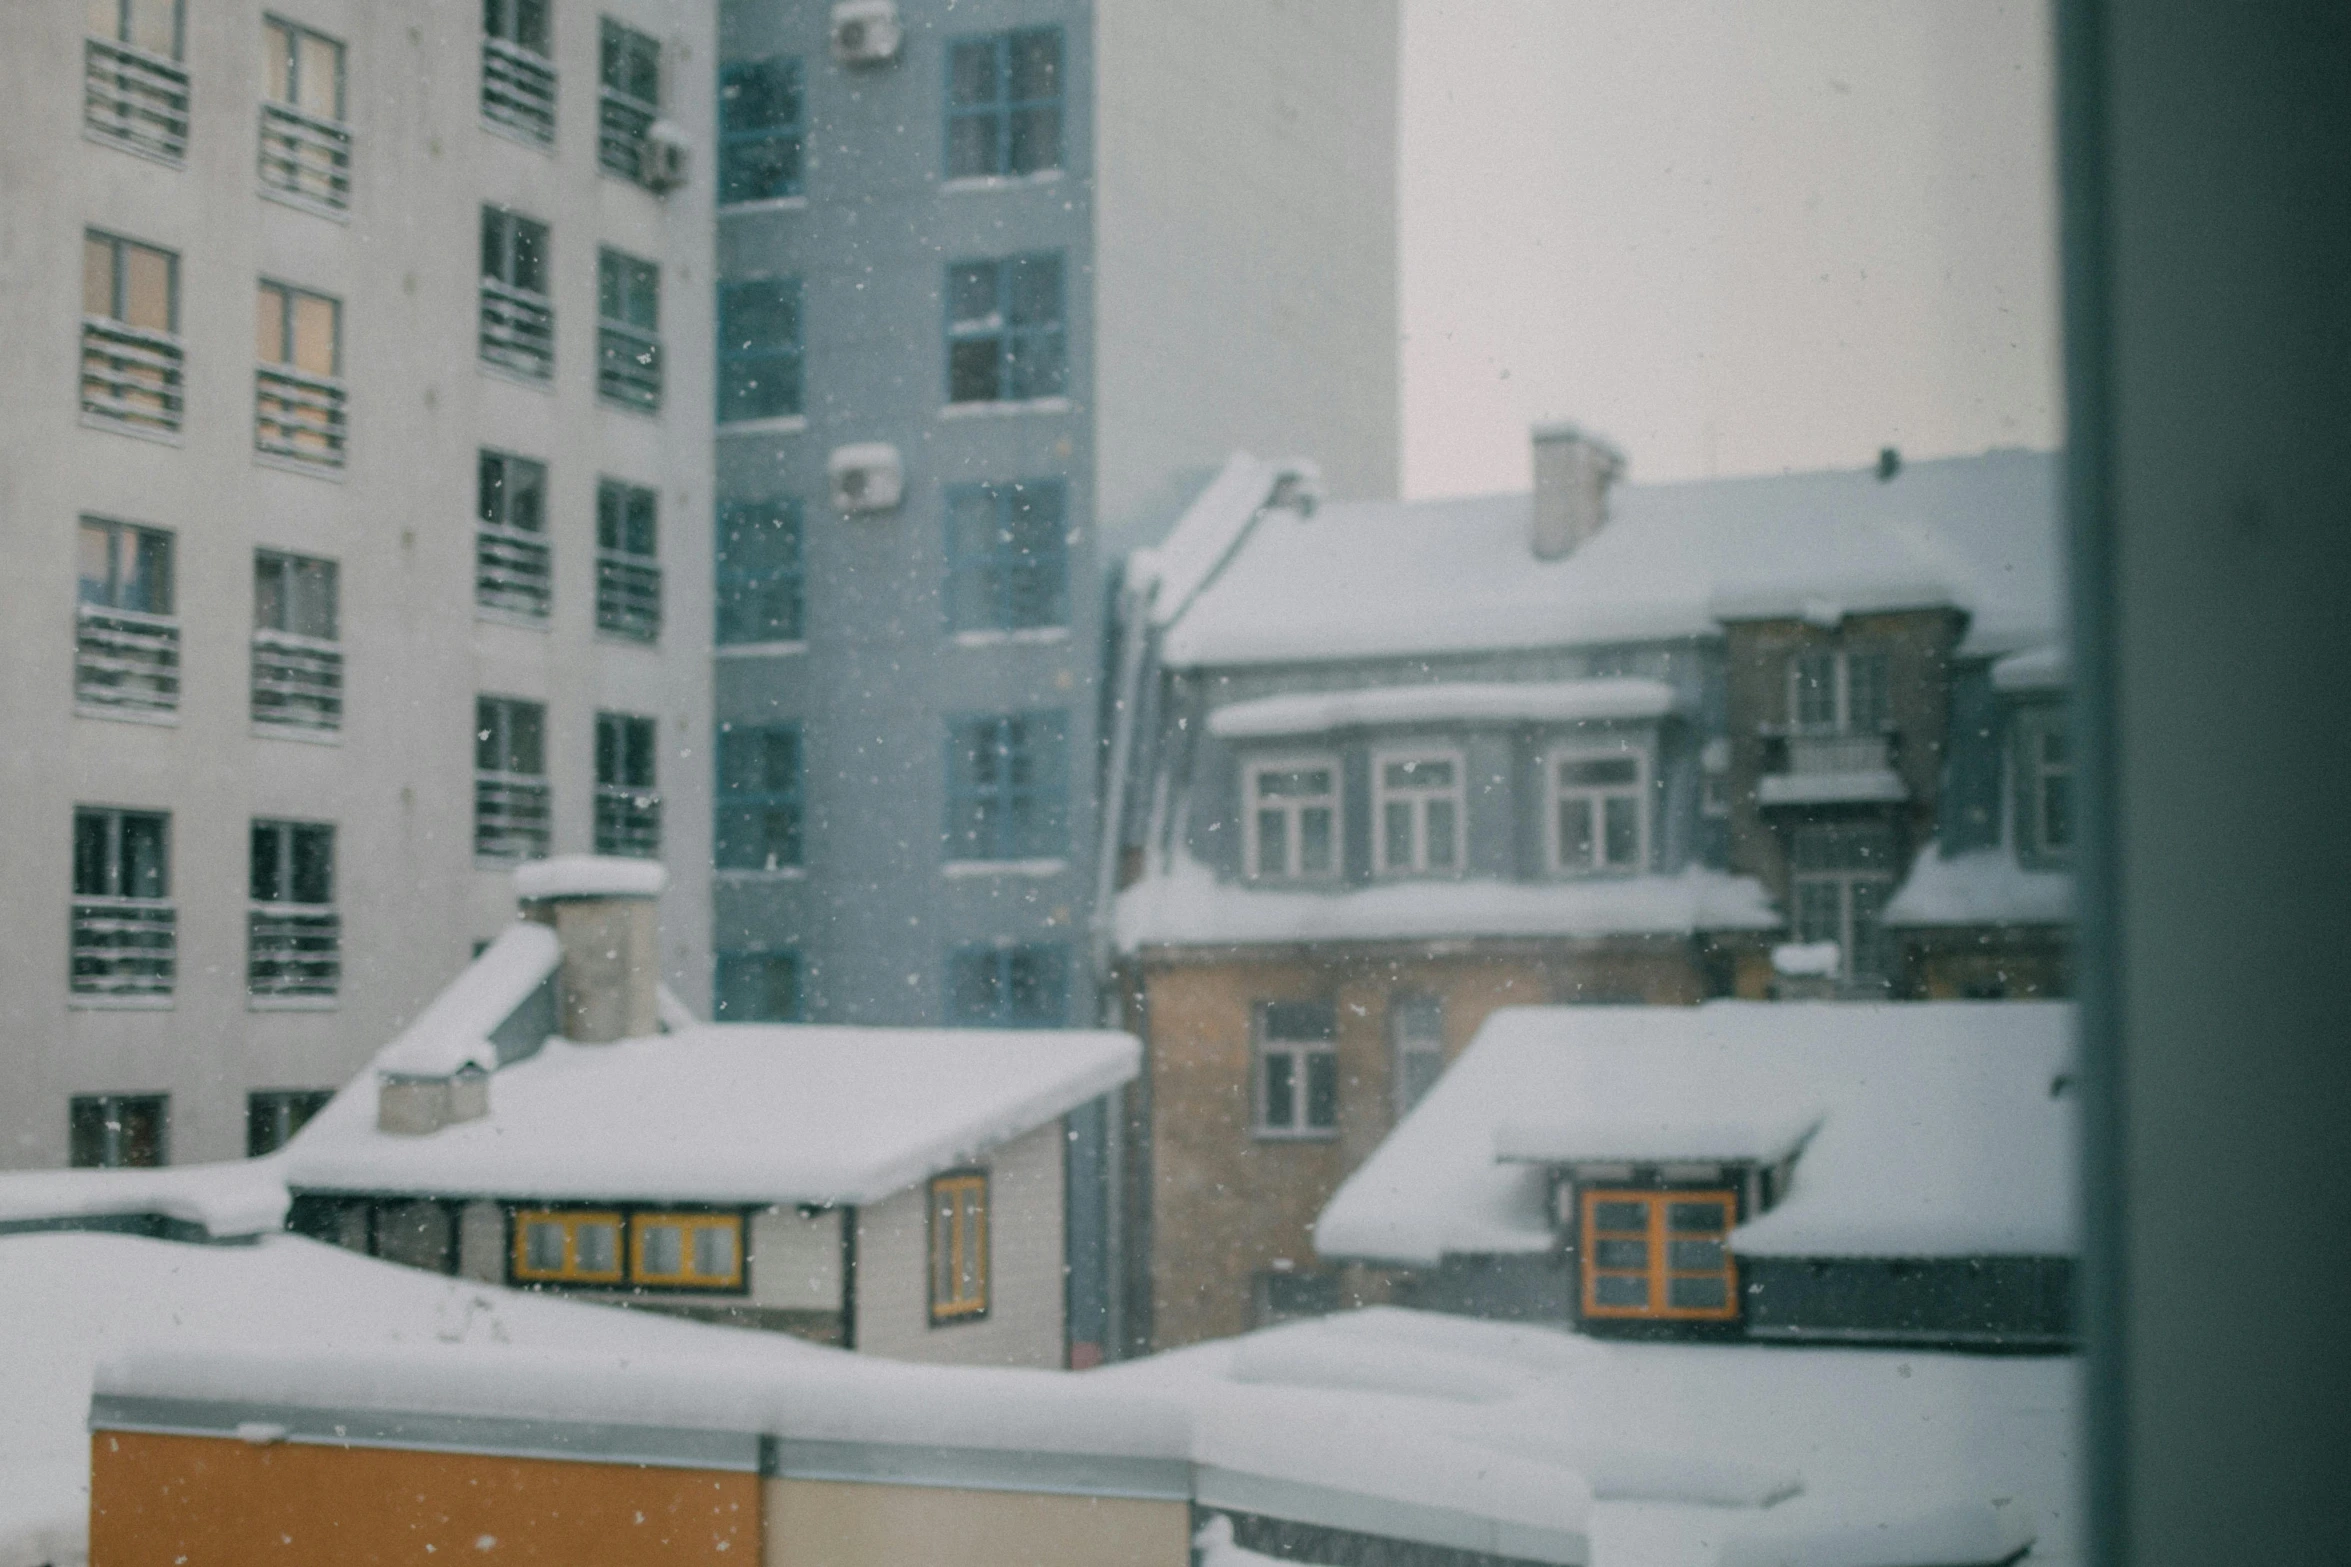 the view from a snowy roof to buildings and windows